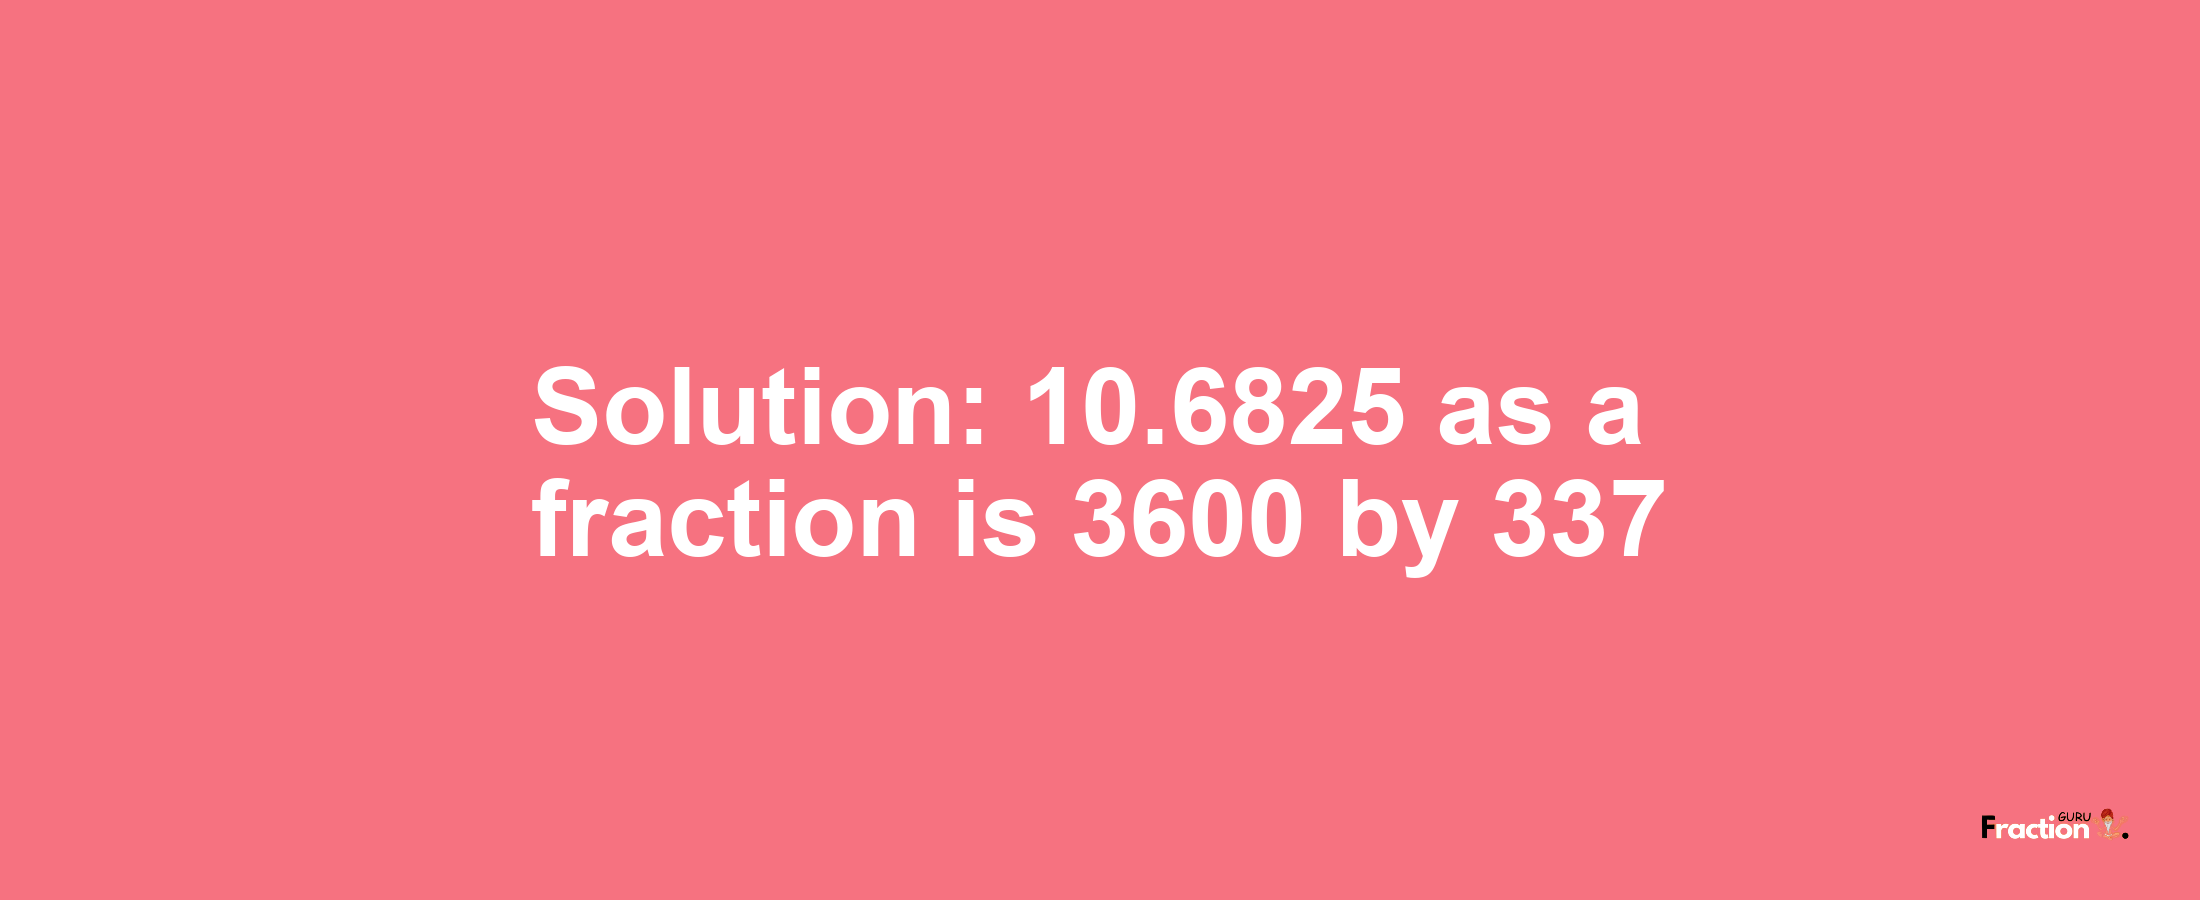 Solution:10.6825 as a fraction is 3600/337